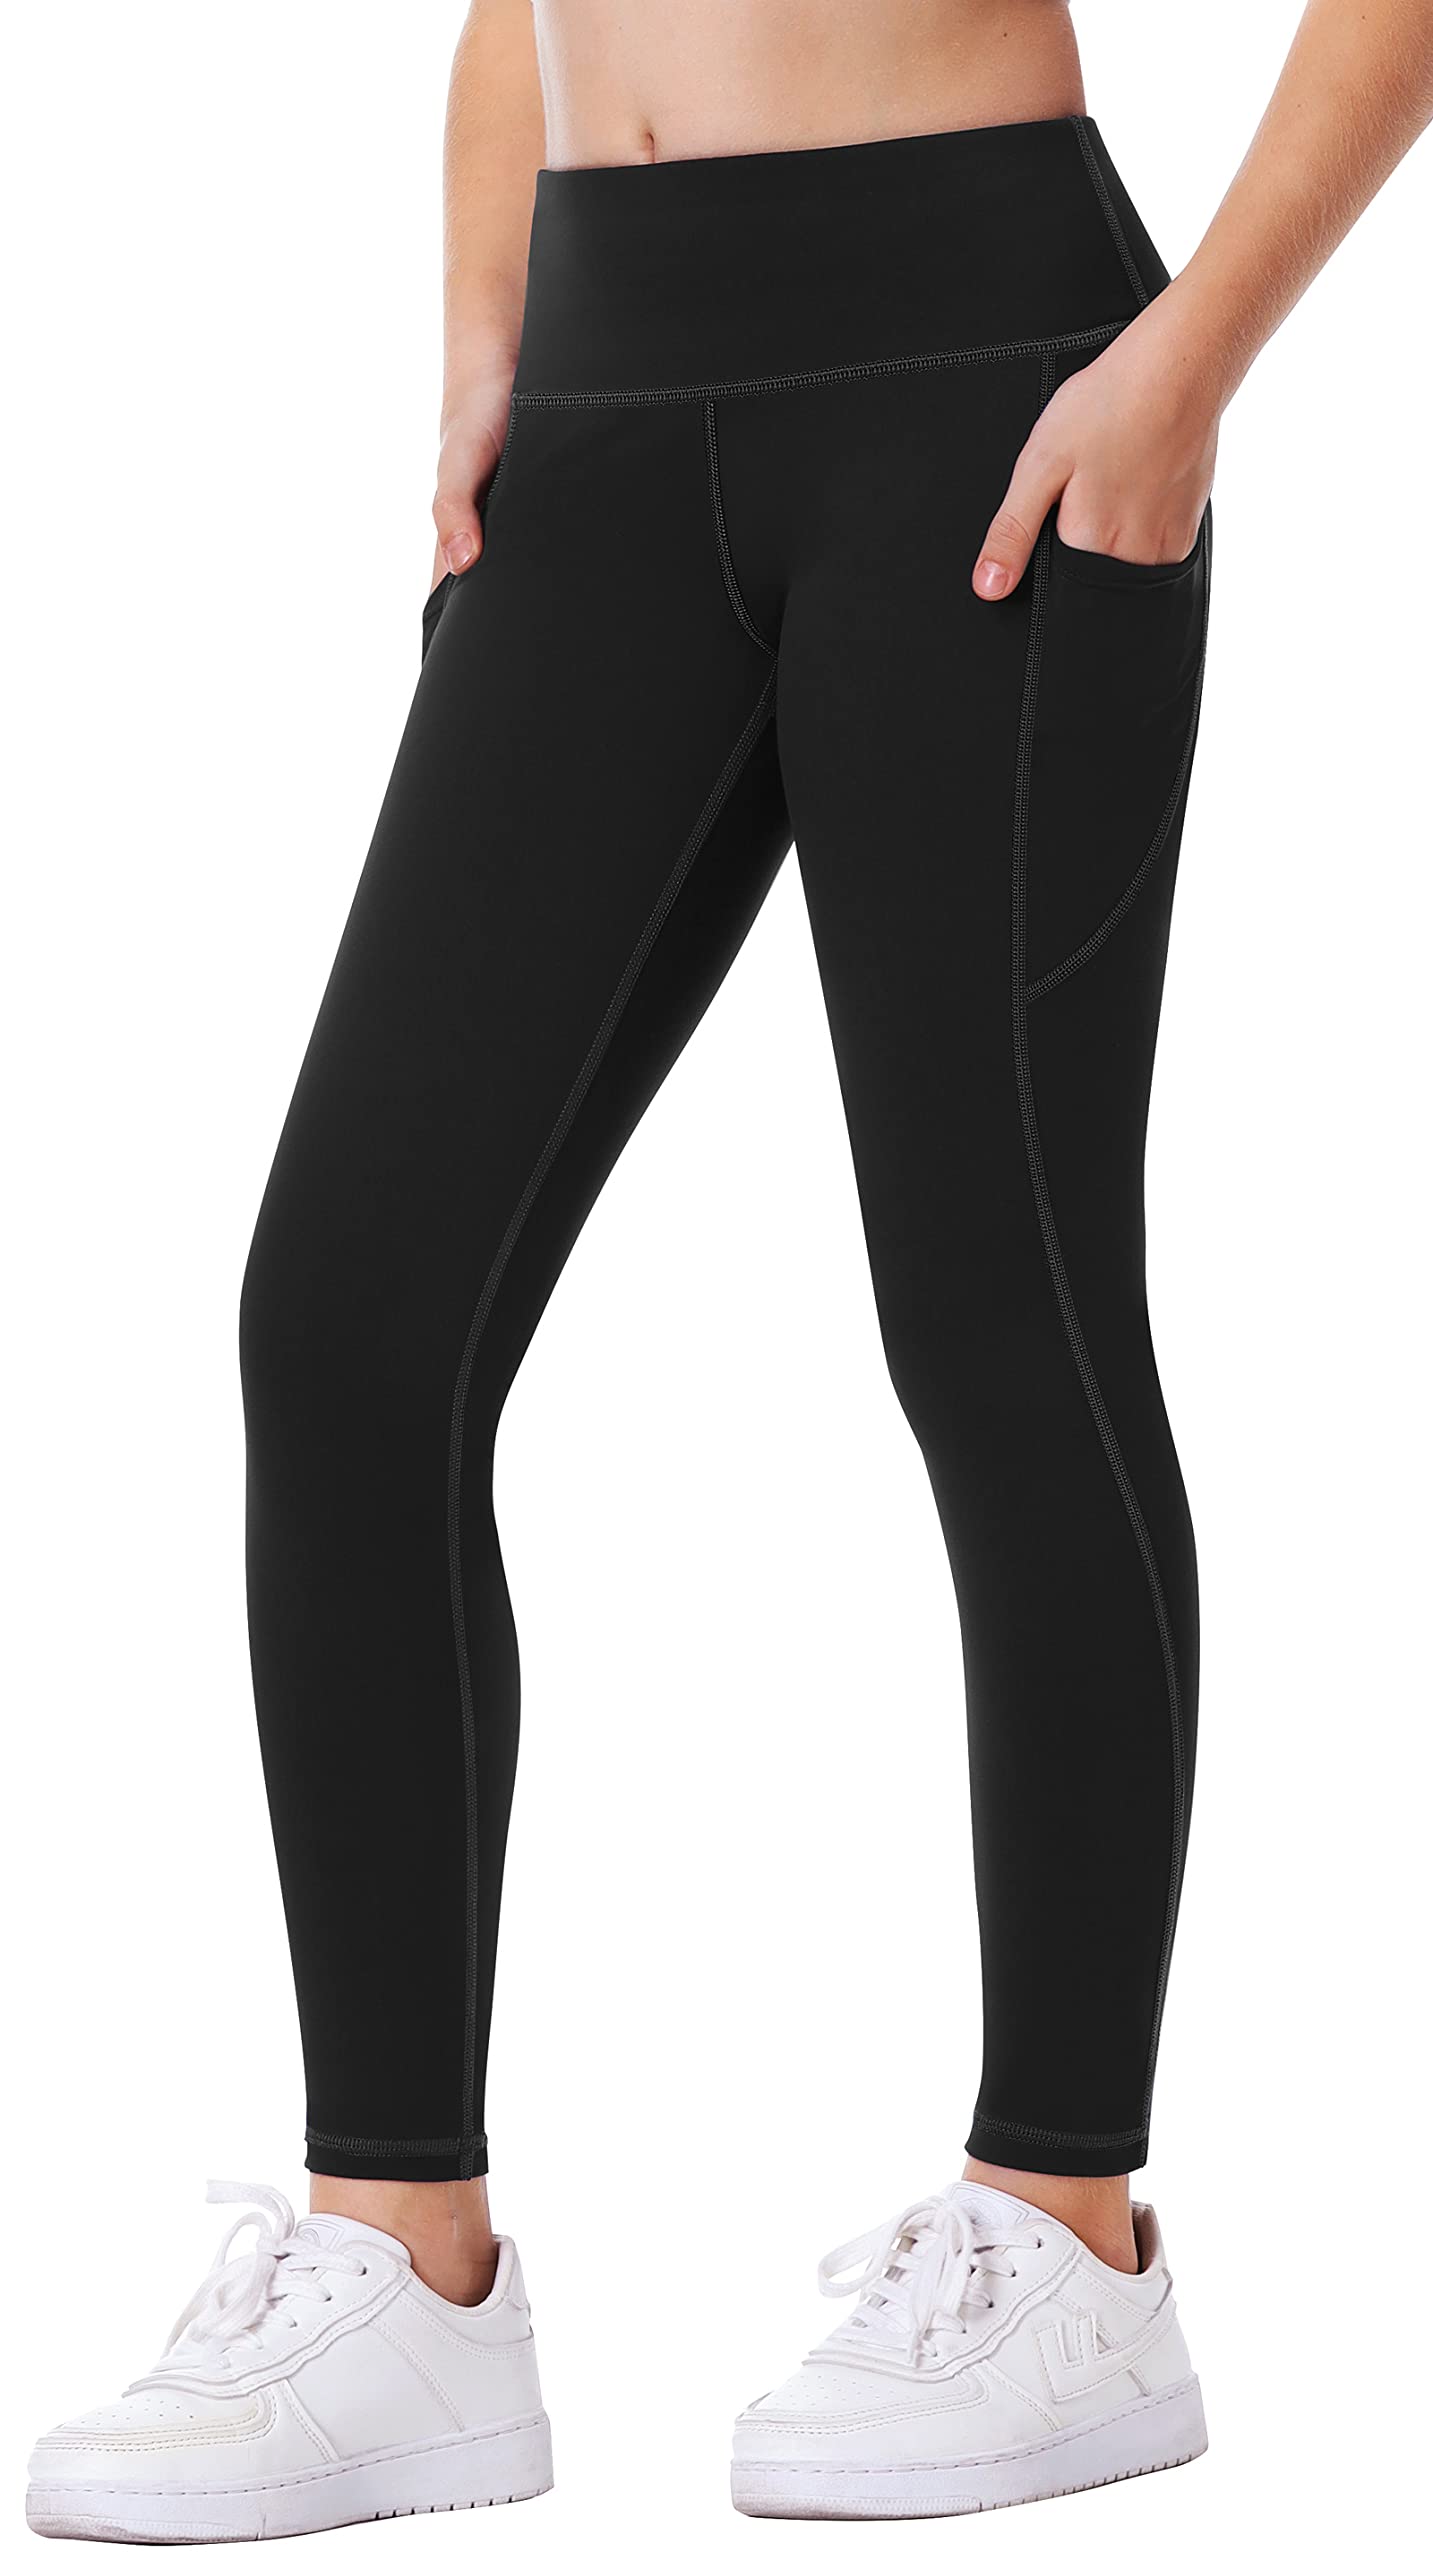 Buy LZYVOO High Waisted Yoga Leggings with Pockets, Tummy Control Workout  Pants for Women-Black-L at Amazon.in